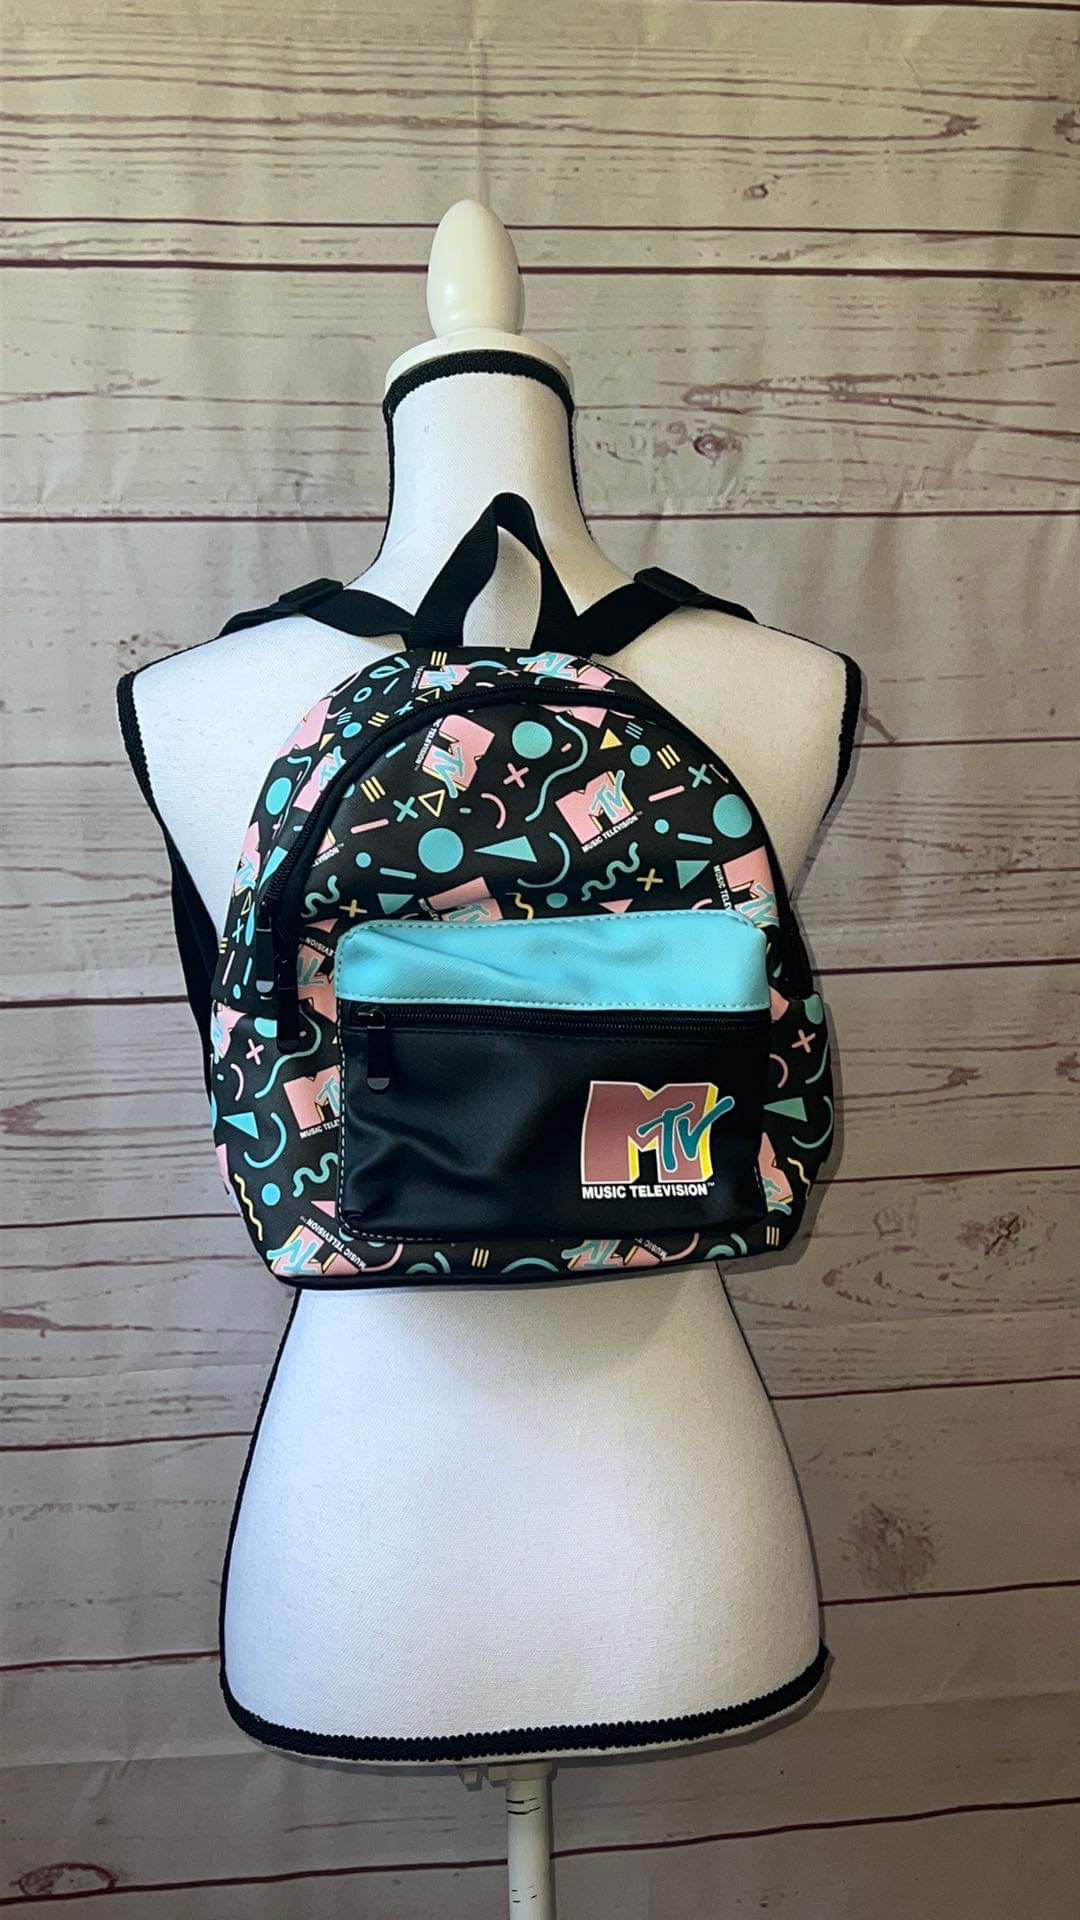 MTV 2021 retro faux leather 80s influence mini backpack. Adjustable straps